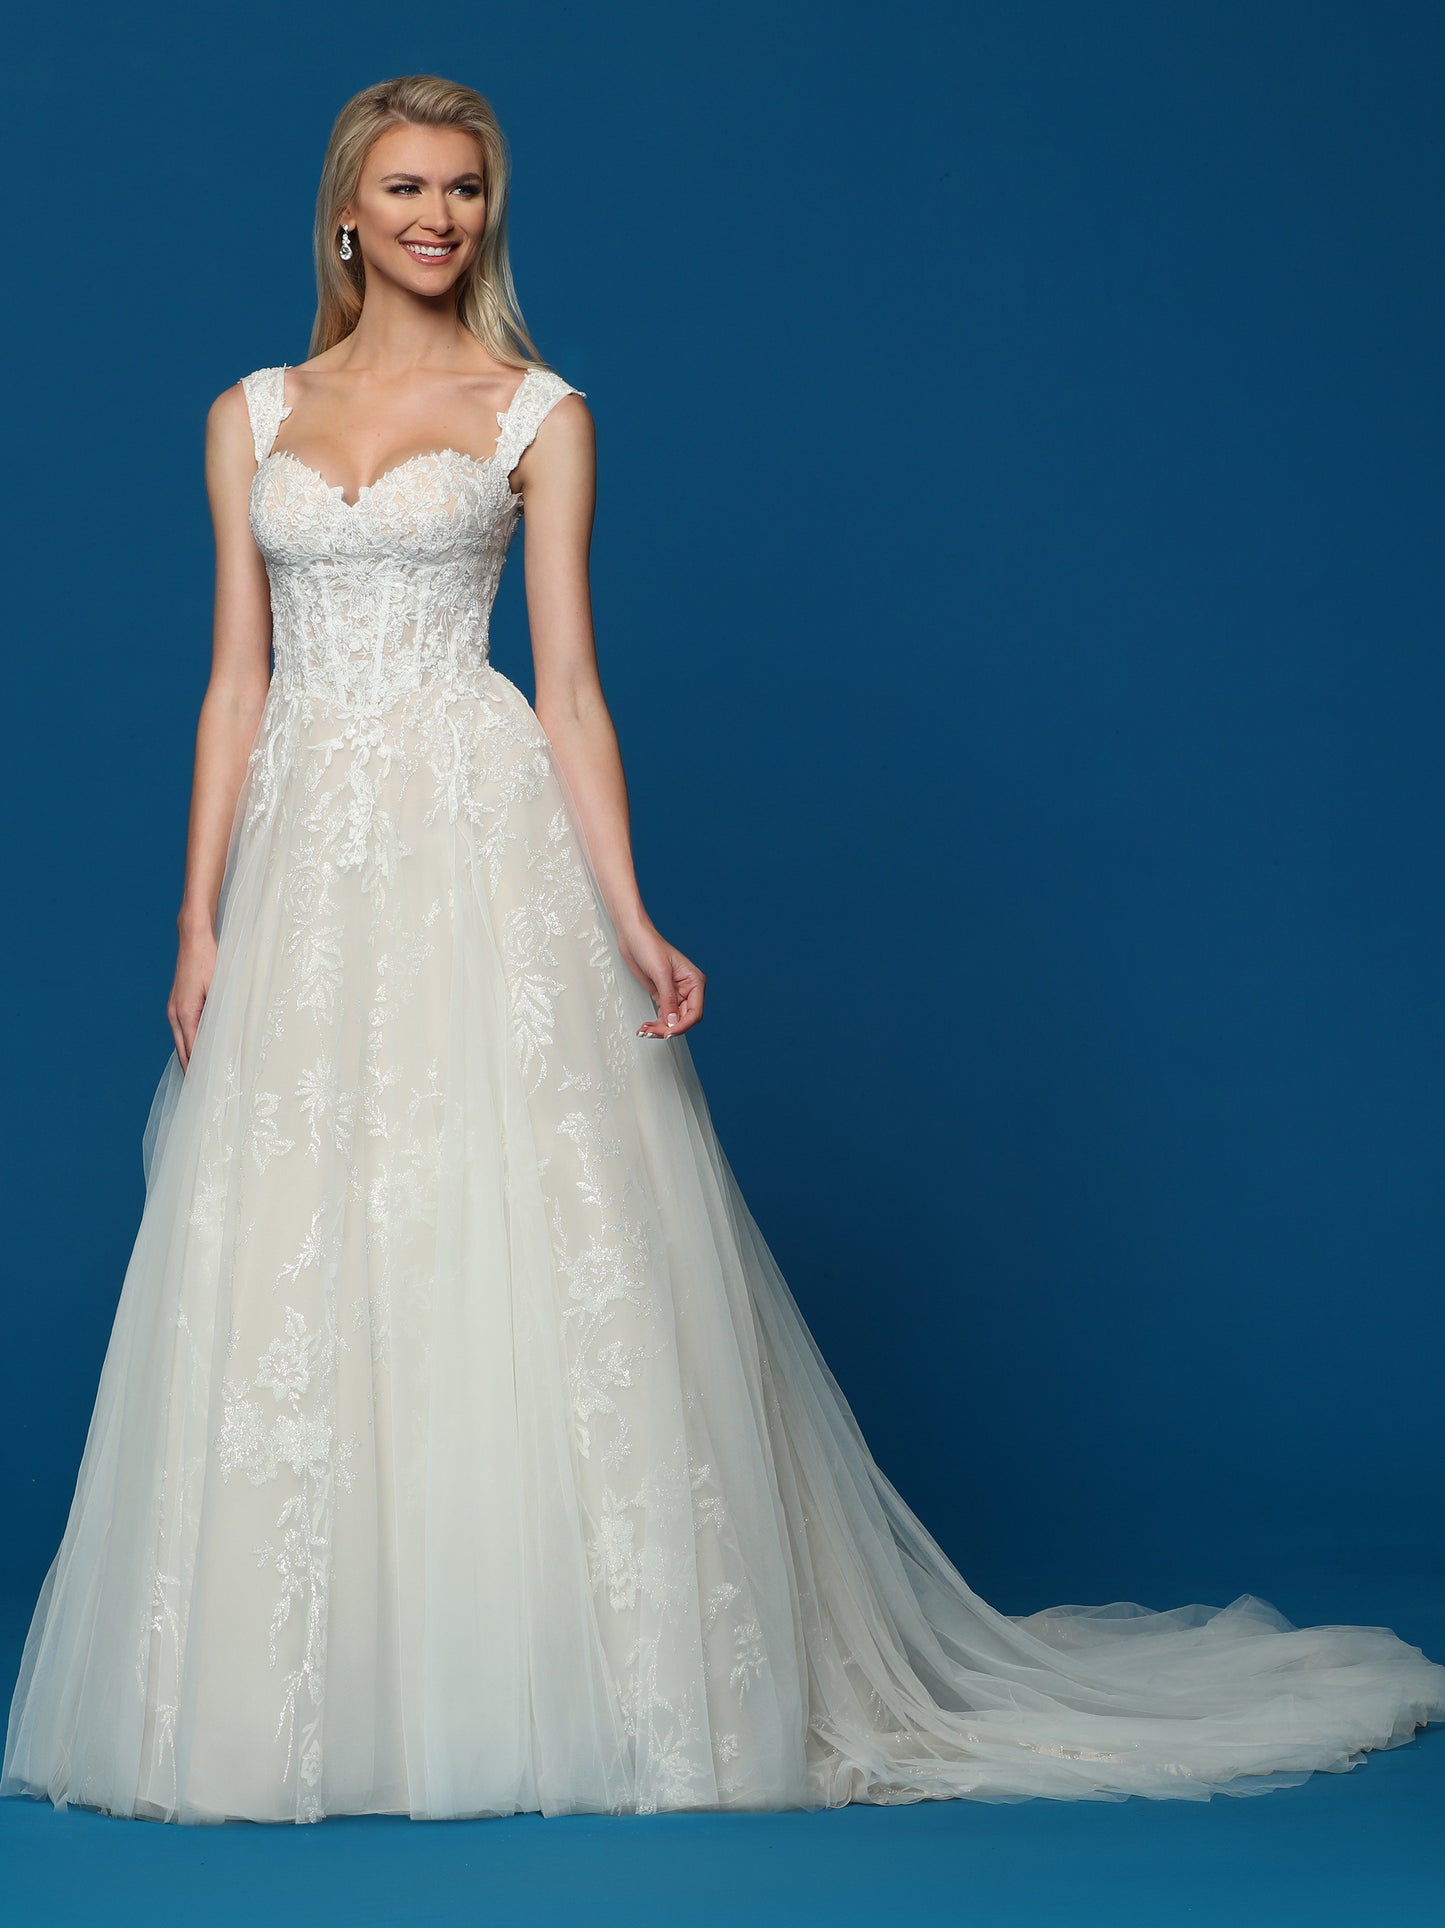 Davinci Bridal 50487 is a strapless sweetheart Tulle ballgown wedding dress. Featuring an Embellished lace bodice cascading into the lush tulle skirt. Corset Lace up back. Available for 1-2 Week Delivery!!!  Available Colors: Ivory/Ivory, Ivory/Nude  Available Sizes: 2-20